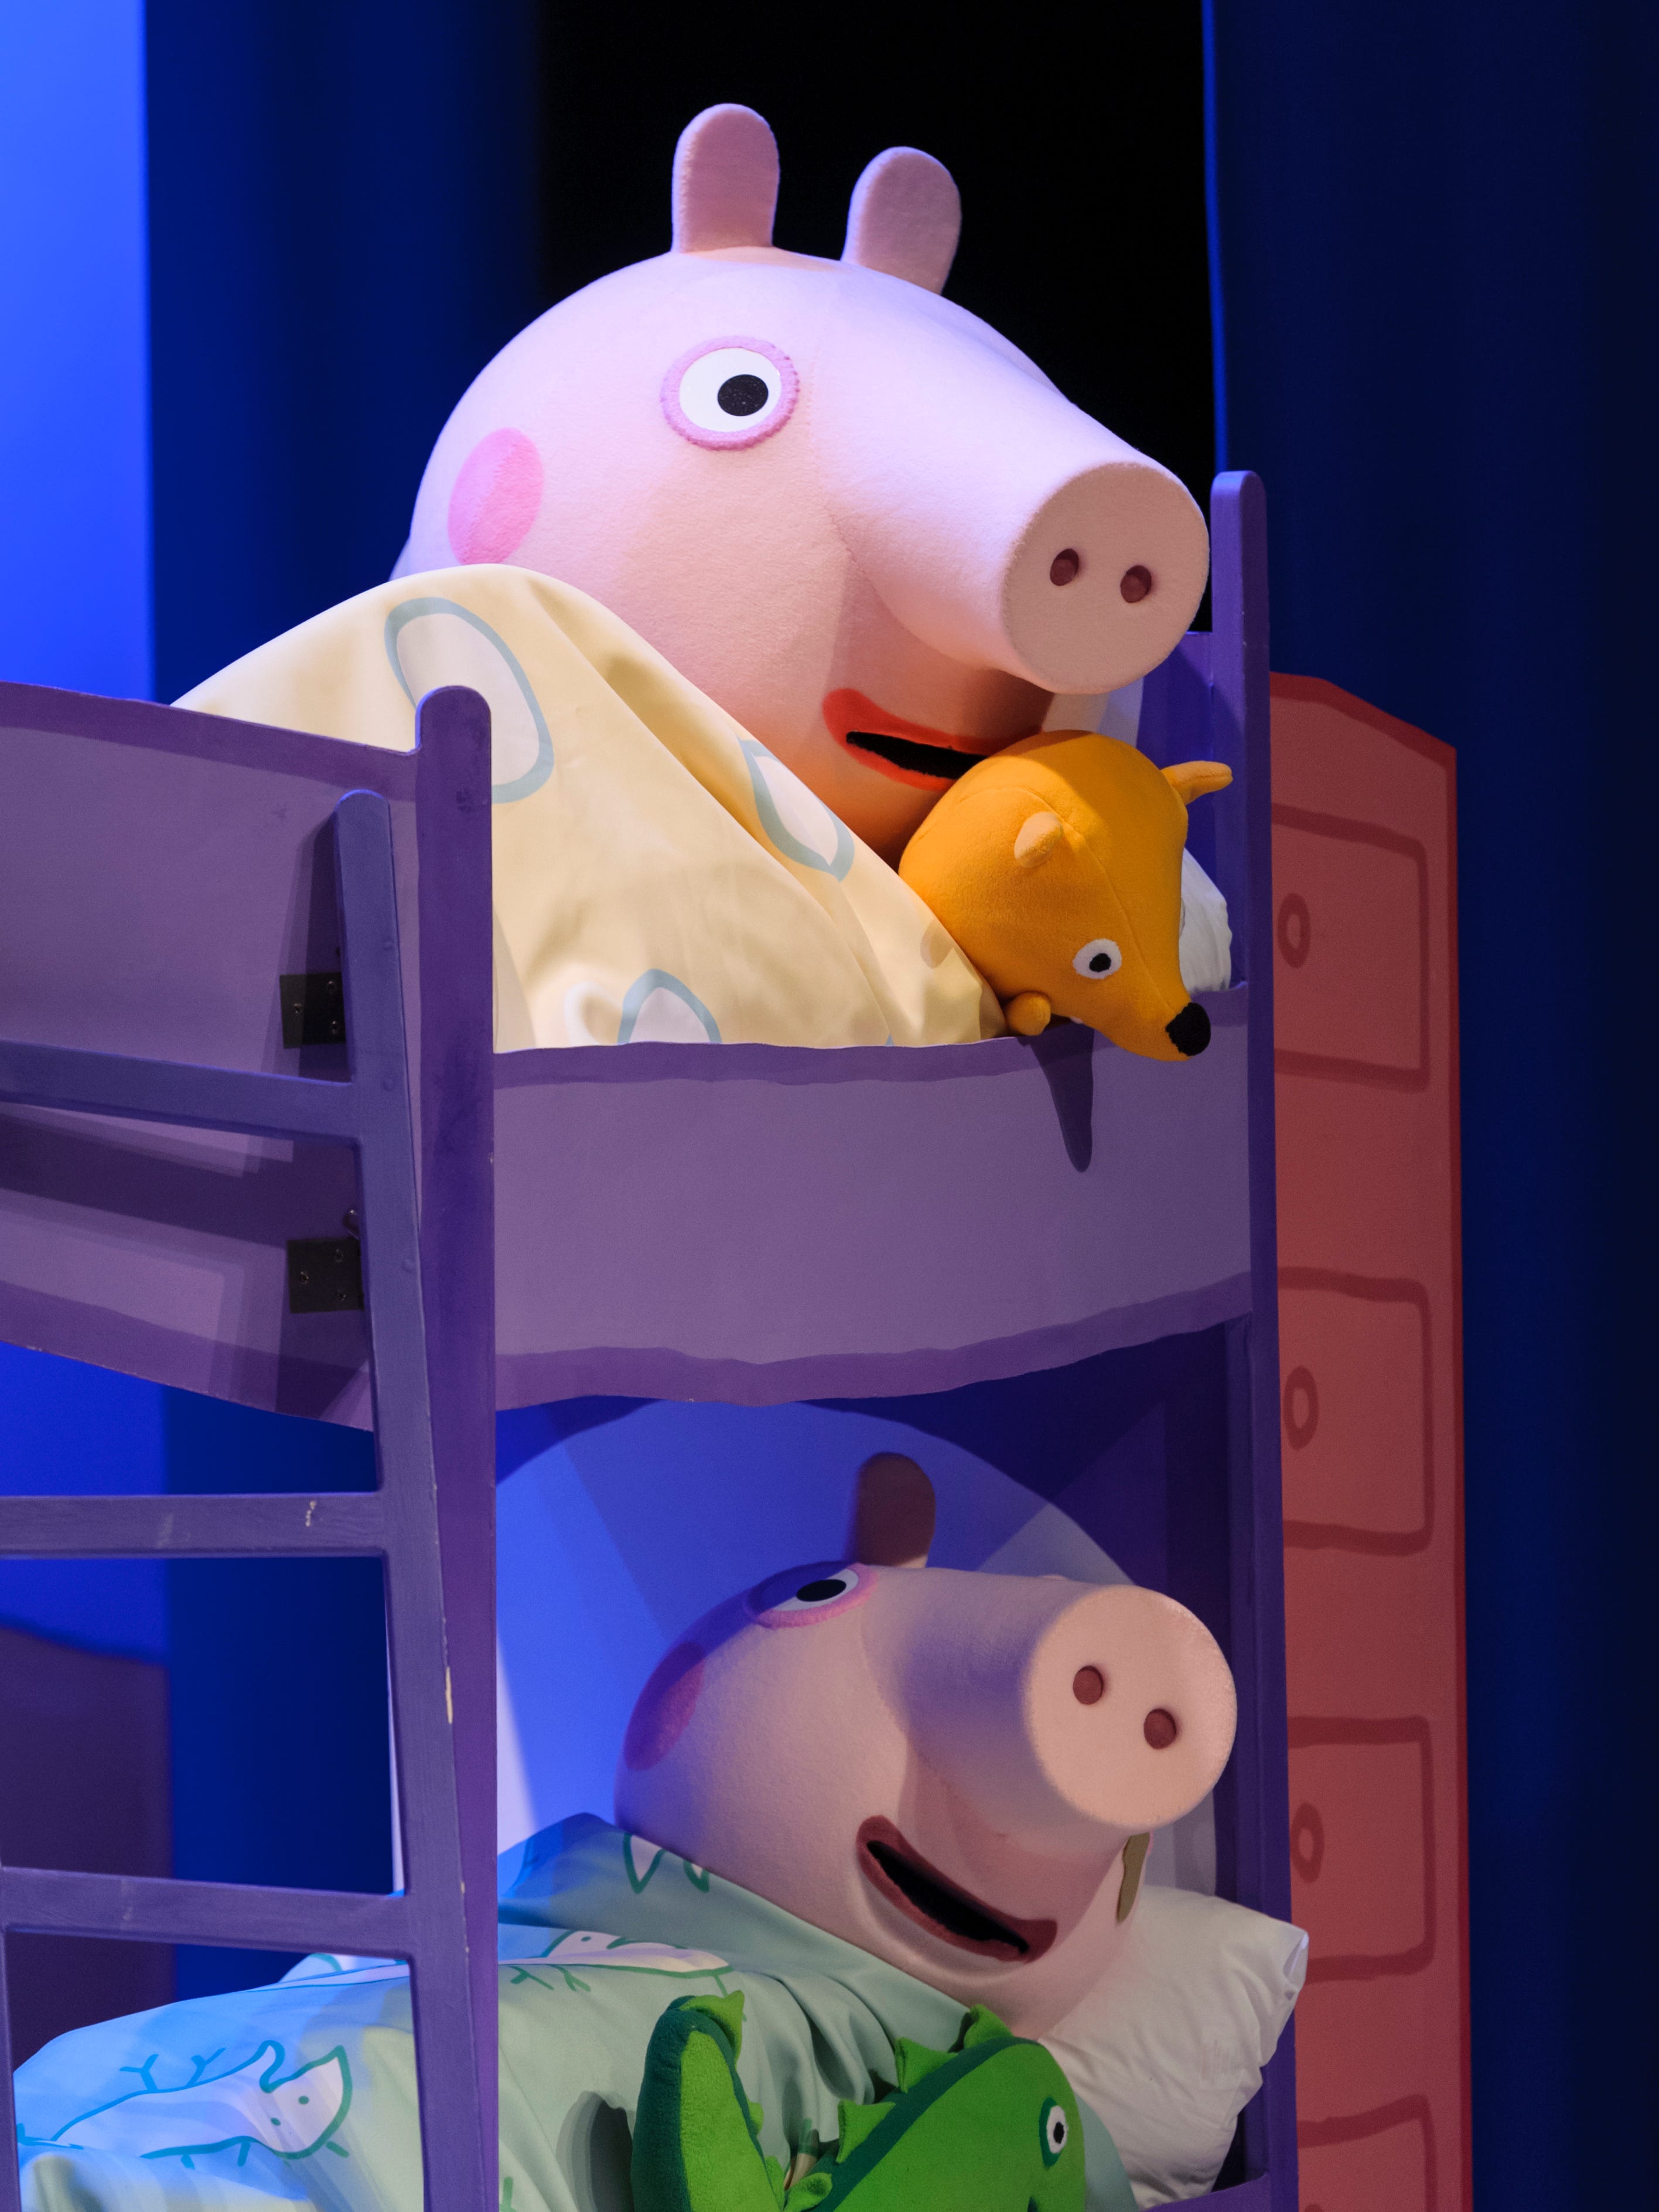 Peppa Pig Live Returns To Area, Peppa Pig Bunk Bed